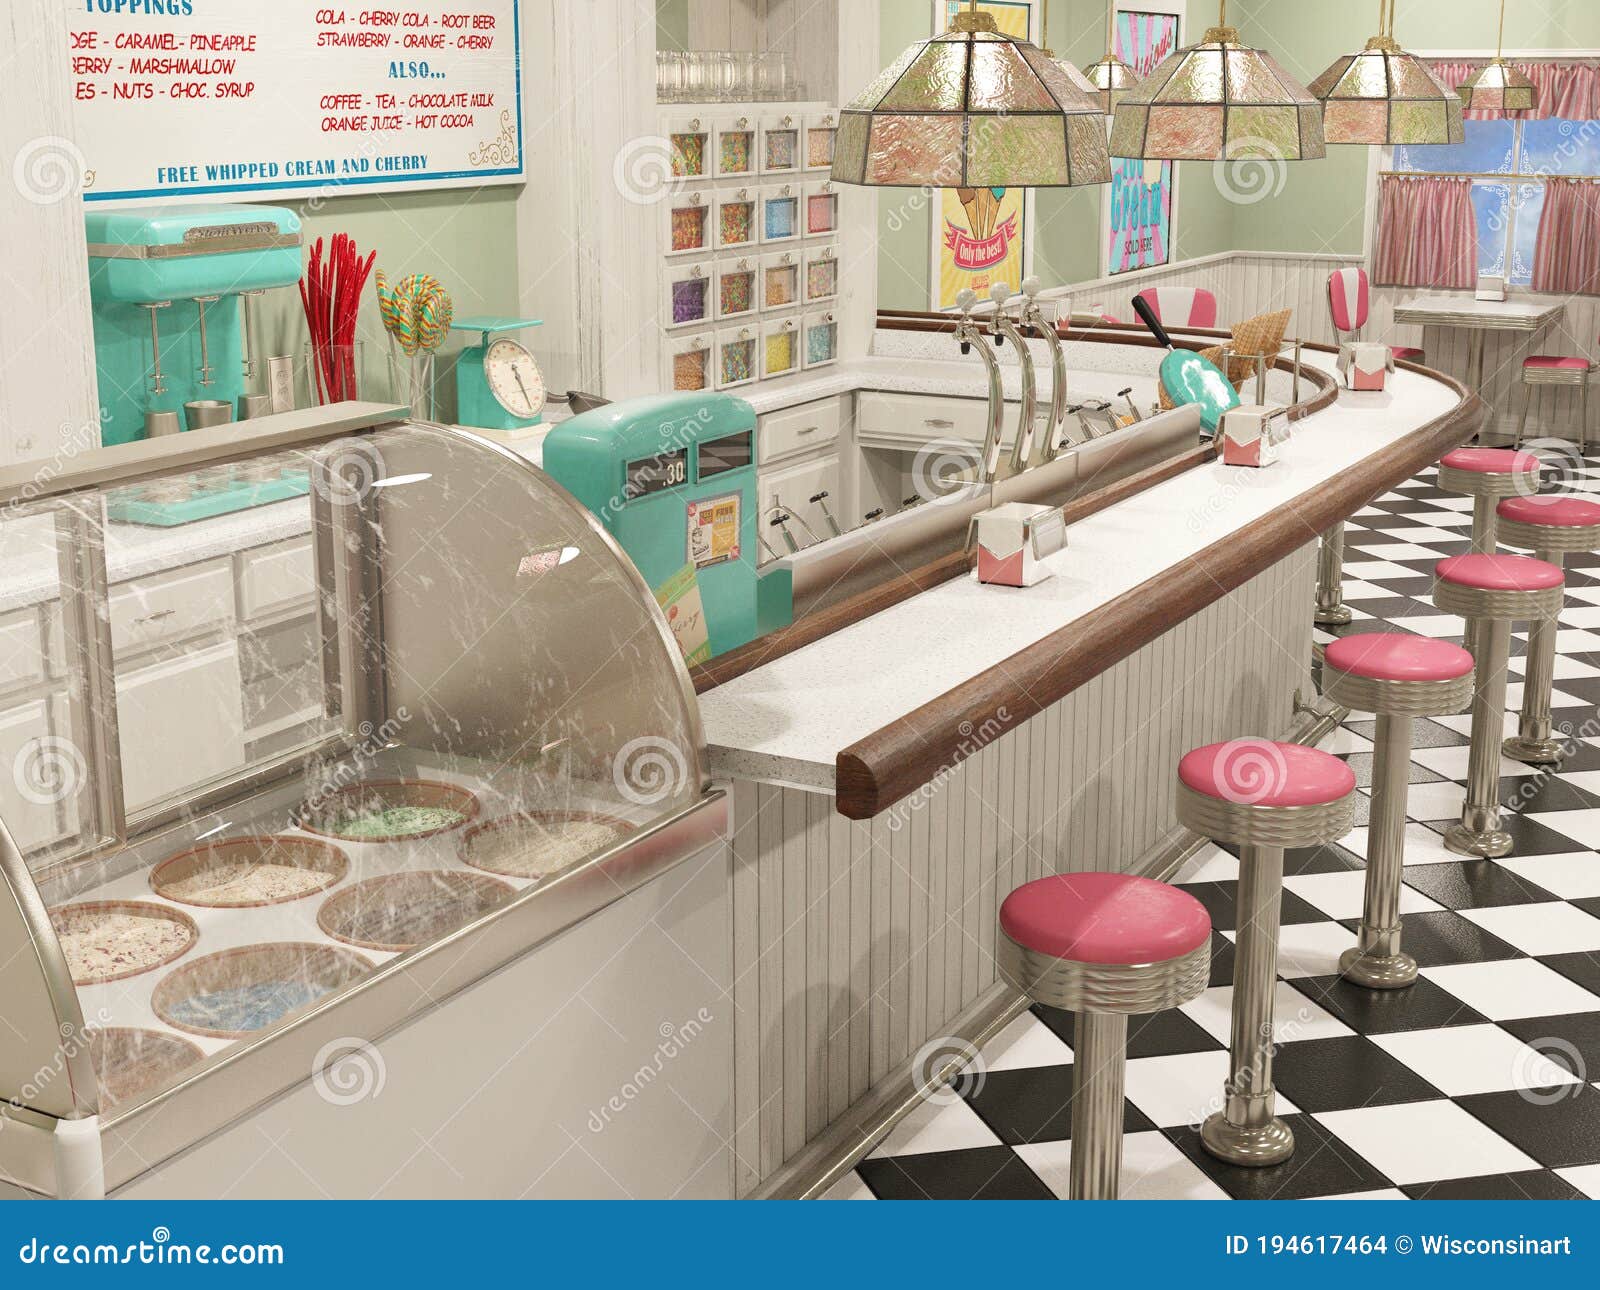 ice cream parlor, siop, confections, restaurant